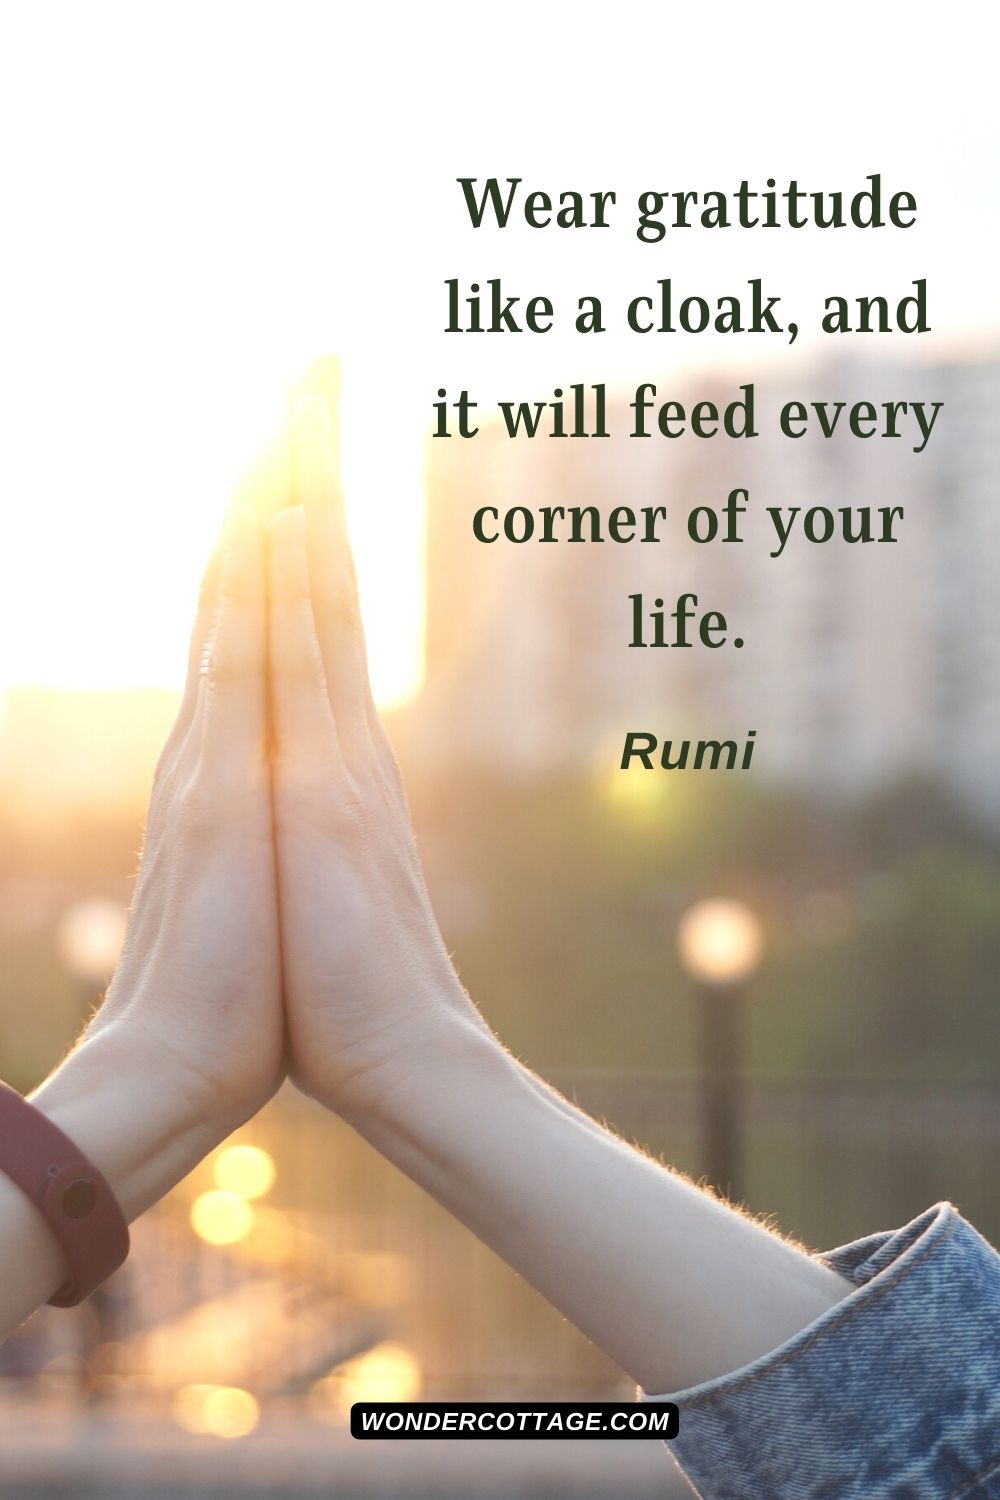 Wear gratitude like a cloak, and it will feed every corner of your life. Rumi - Thanksgiving Quotes With Images